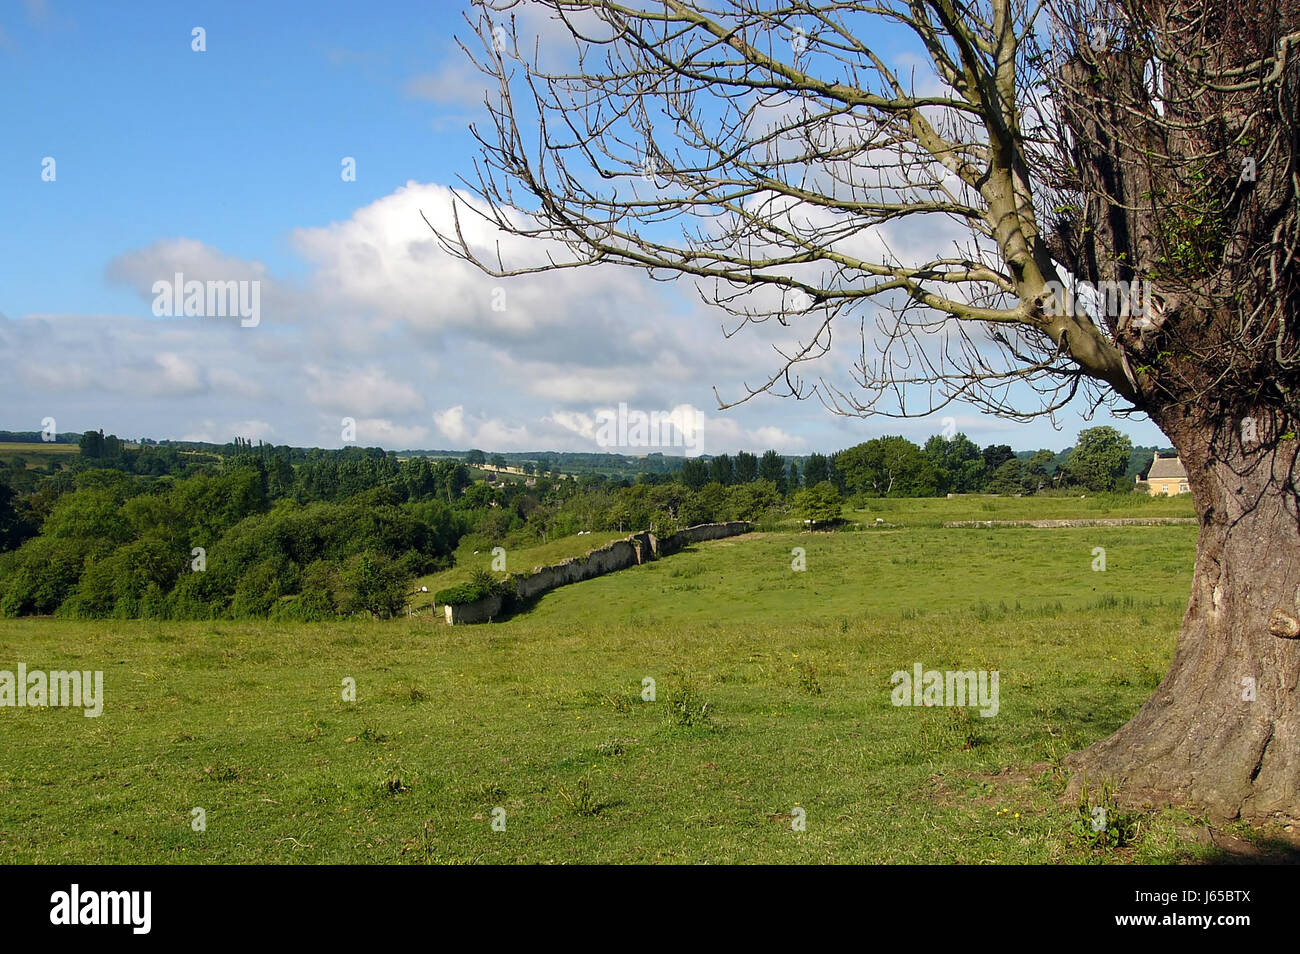 hill tourism wall england land realty ground meadow community village market Stock Photo